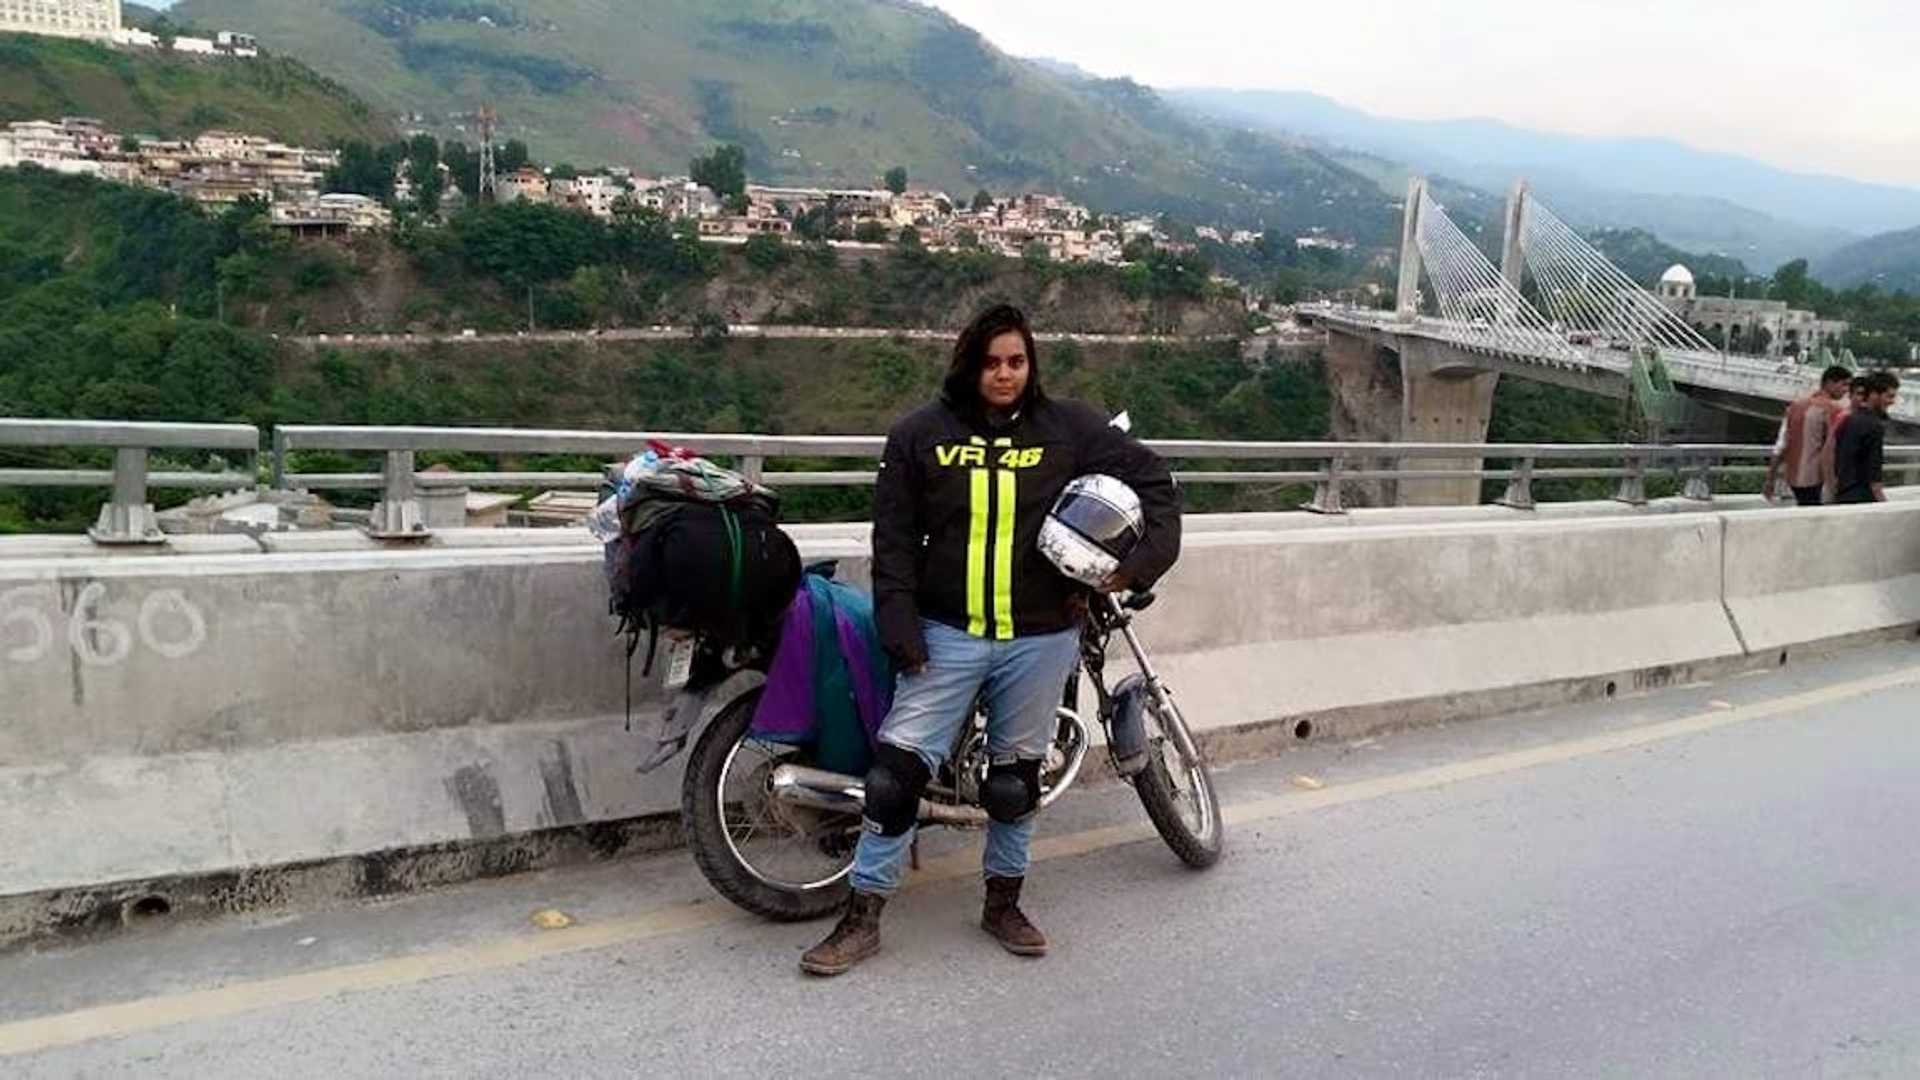 An inspirational journey of Pakistan's first female rider